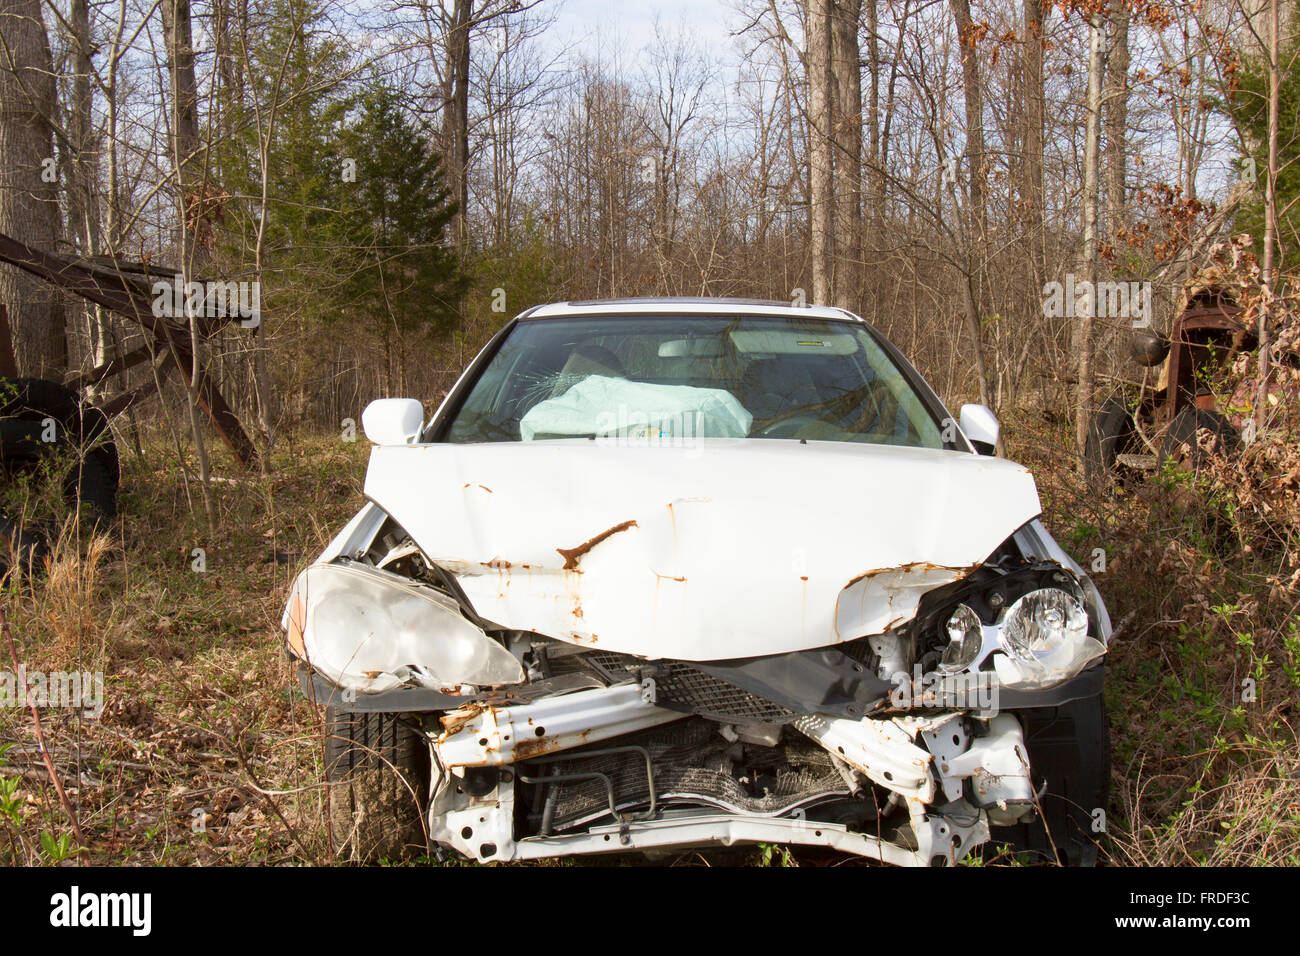 Remains of wrecked car with airbags deployed in field among trees. Stock Photo